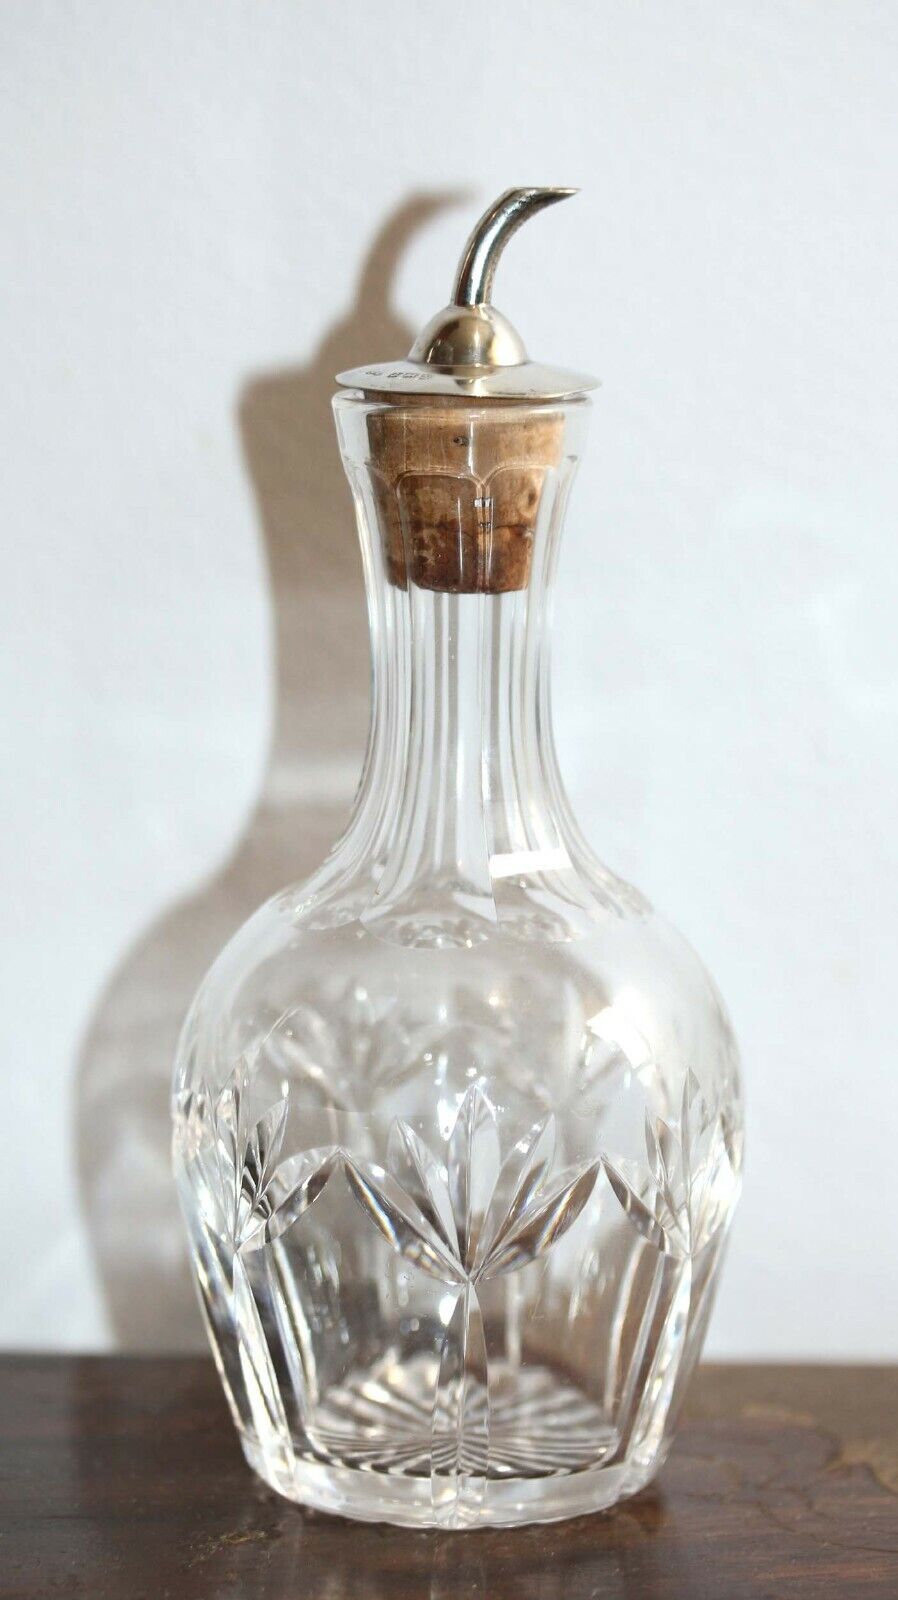 VINTAGE STERLING SILVER & STUART CRYSTAL BITTERS BOTTLE 1951 in great condition 